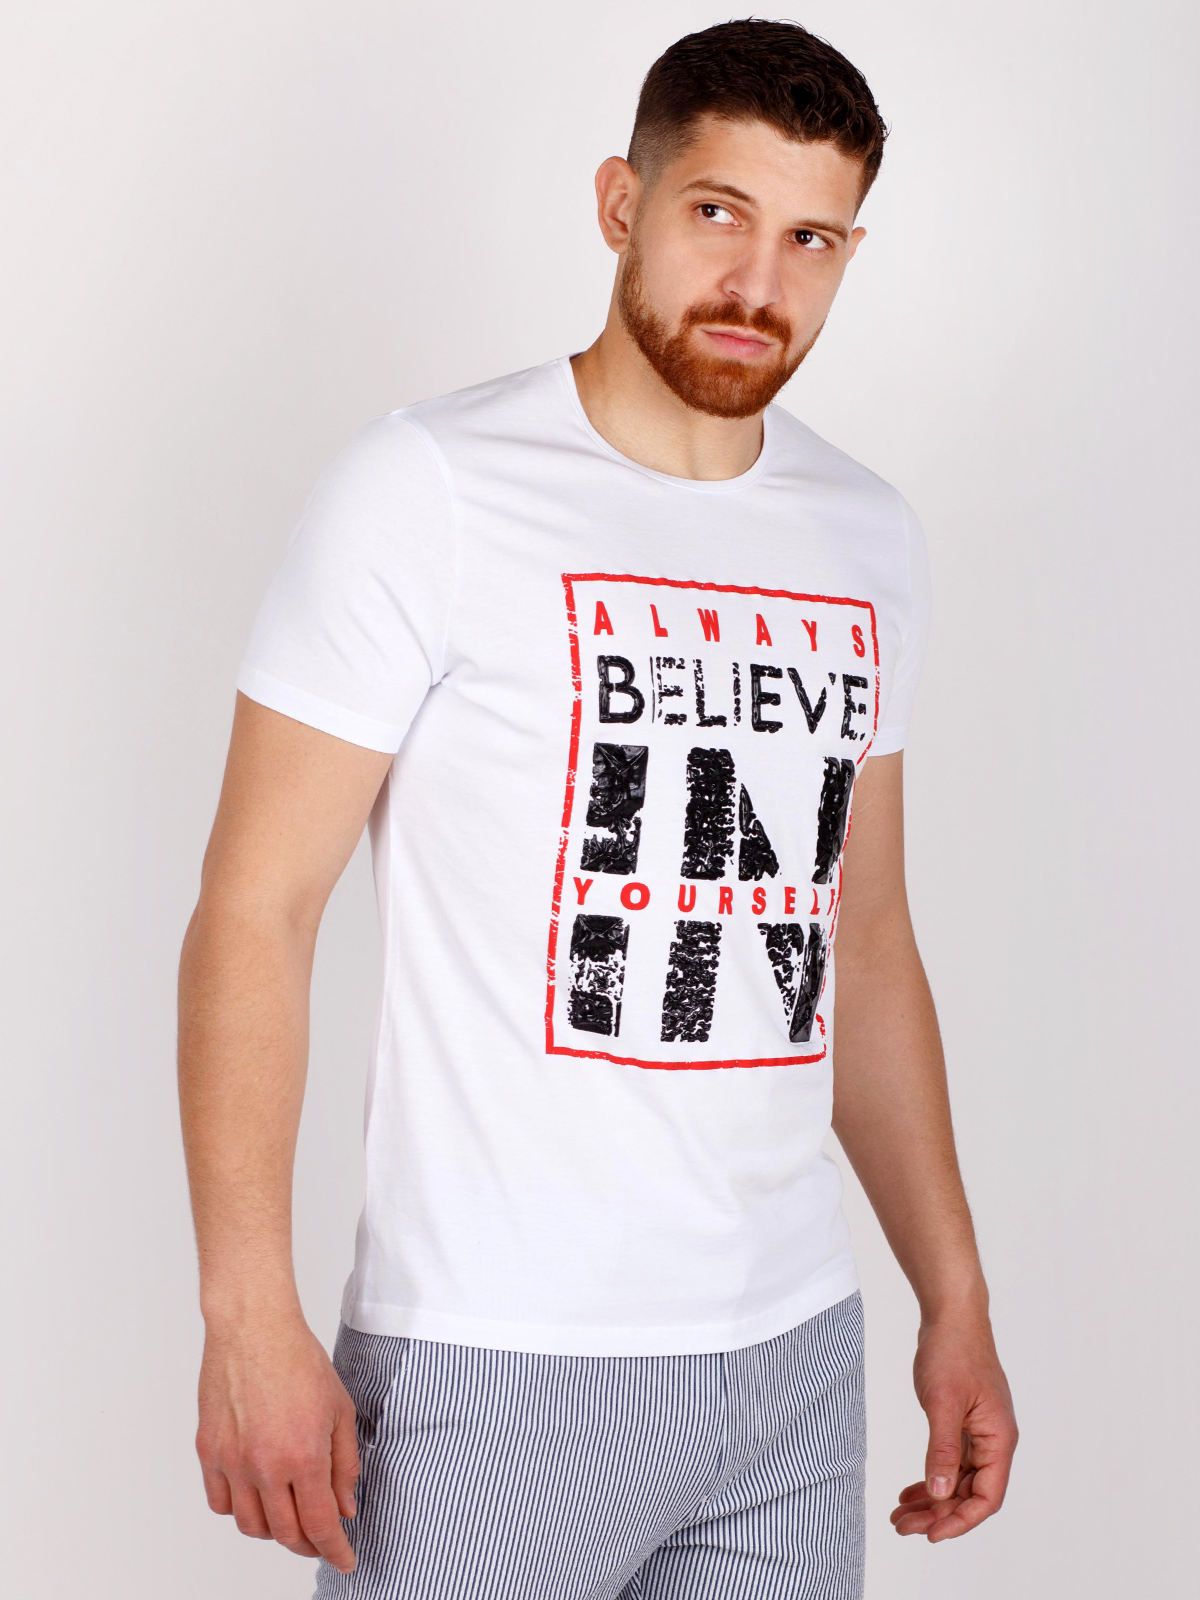 Tshirt with print in black and red - 96412 € 16.31 img2